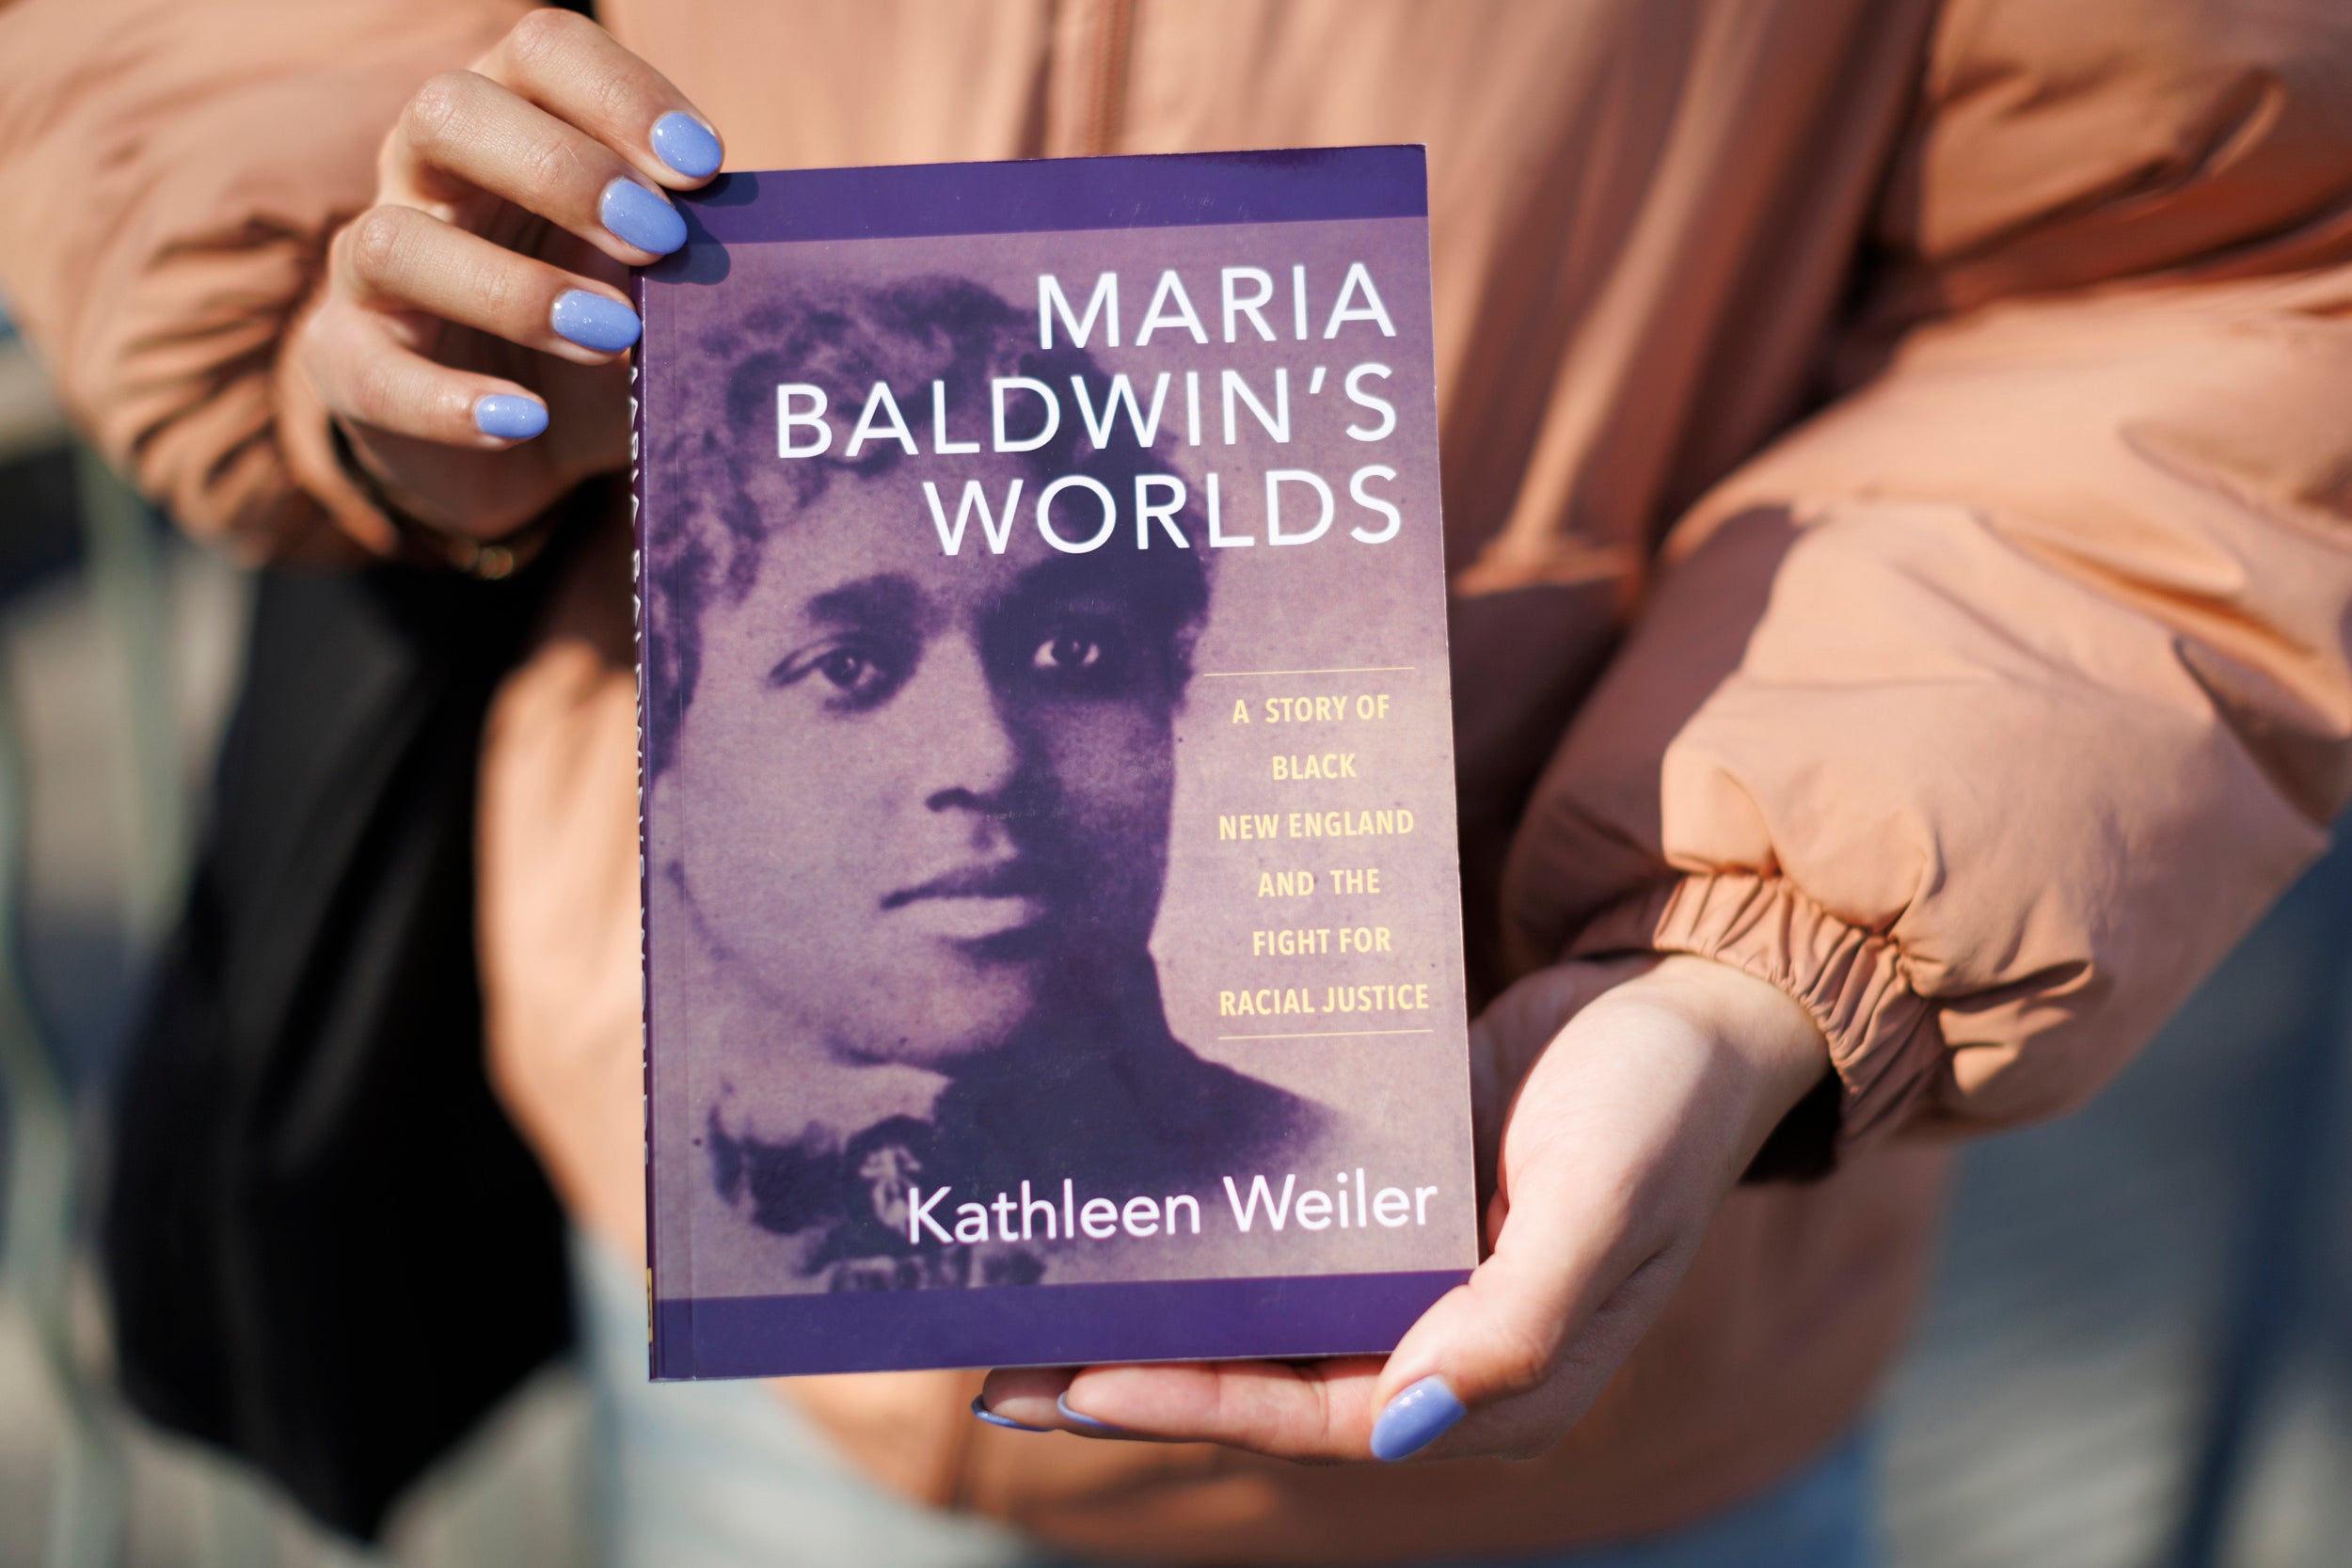 Maya Counter holds a book about Maria Baldwin.